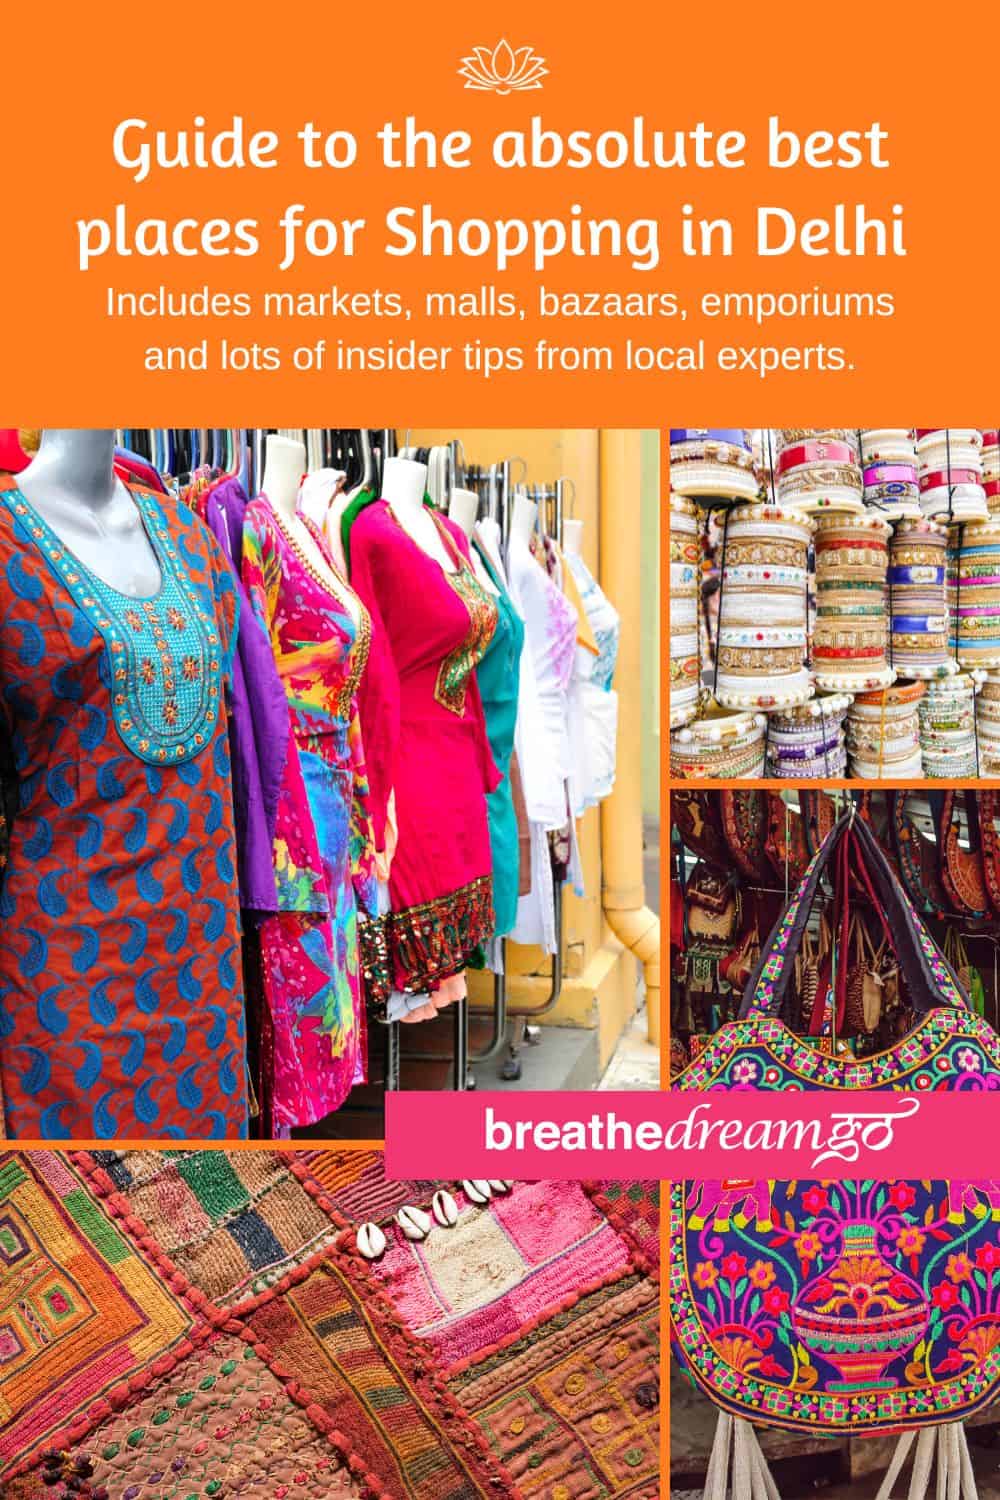 Guide to the best places for shopping in Delhi - Breathedreamgo